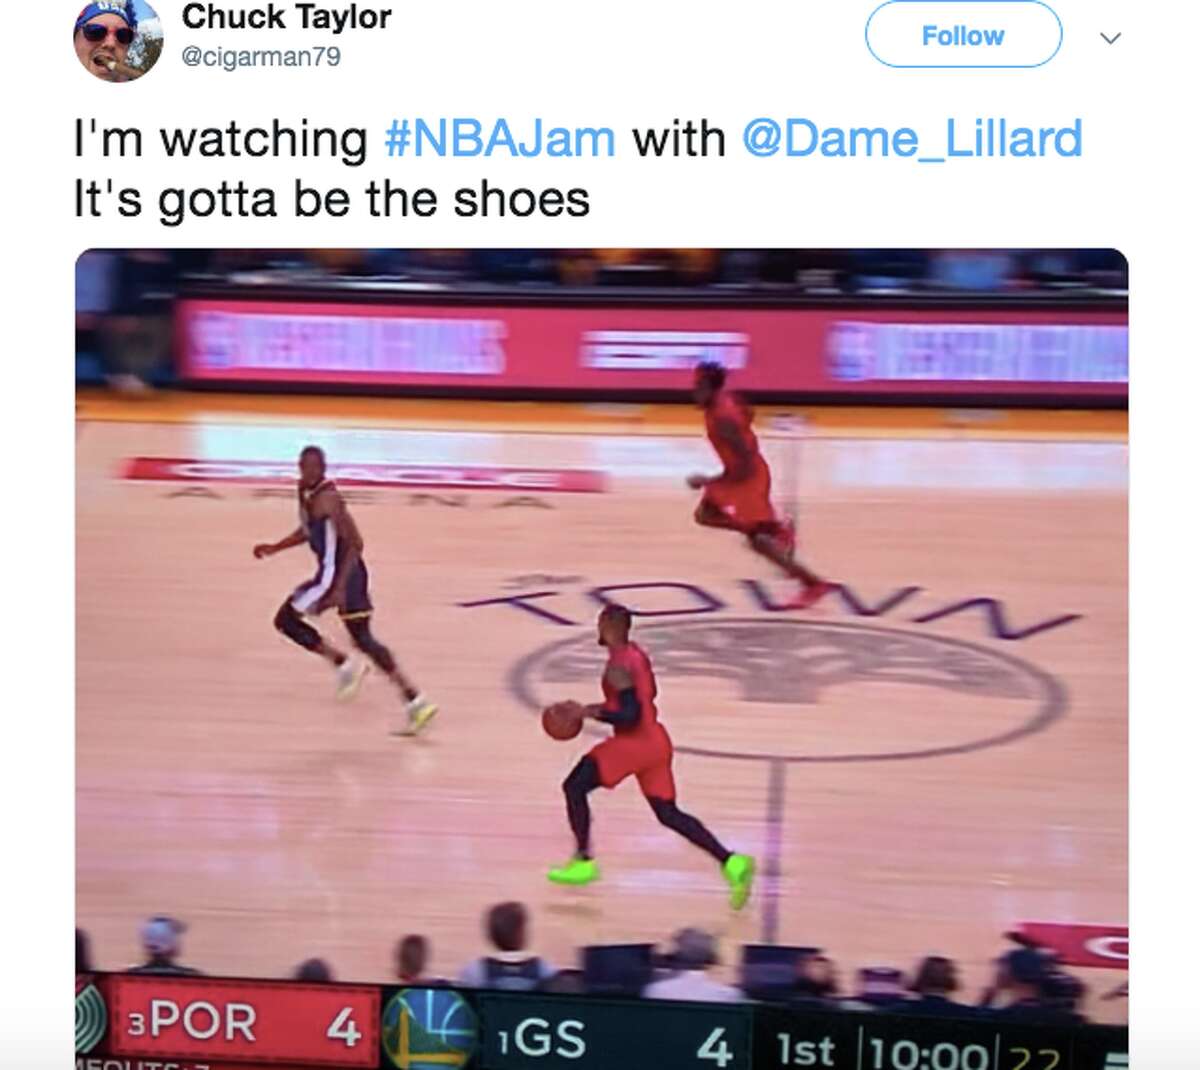 Damian Lillard's neon green shoes cause a stir on Twitter during Game 2